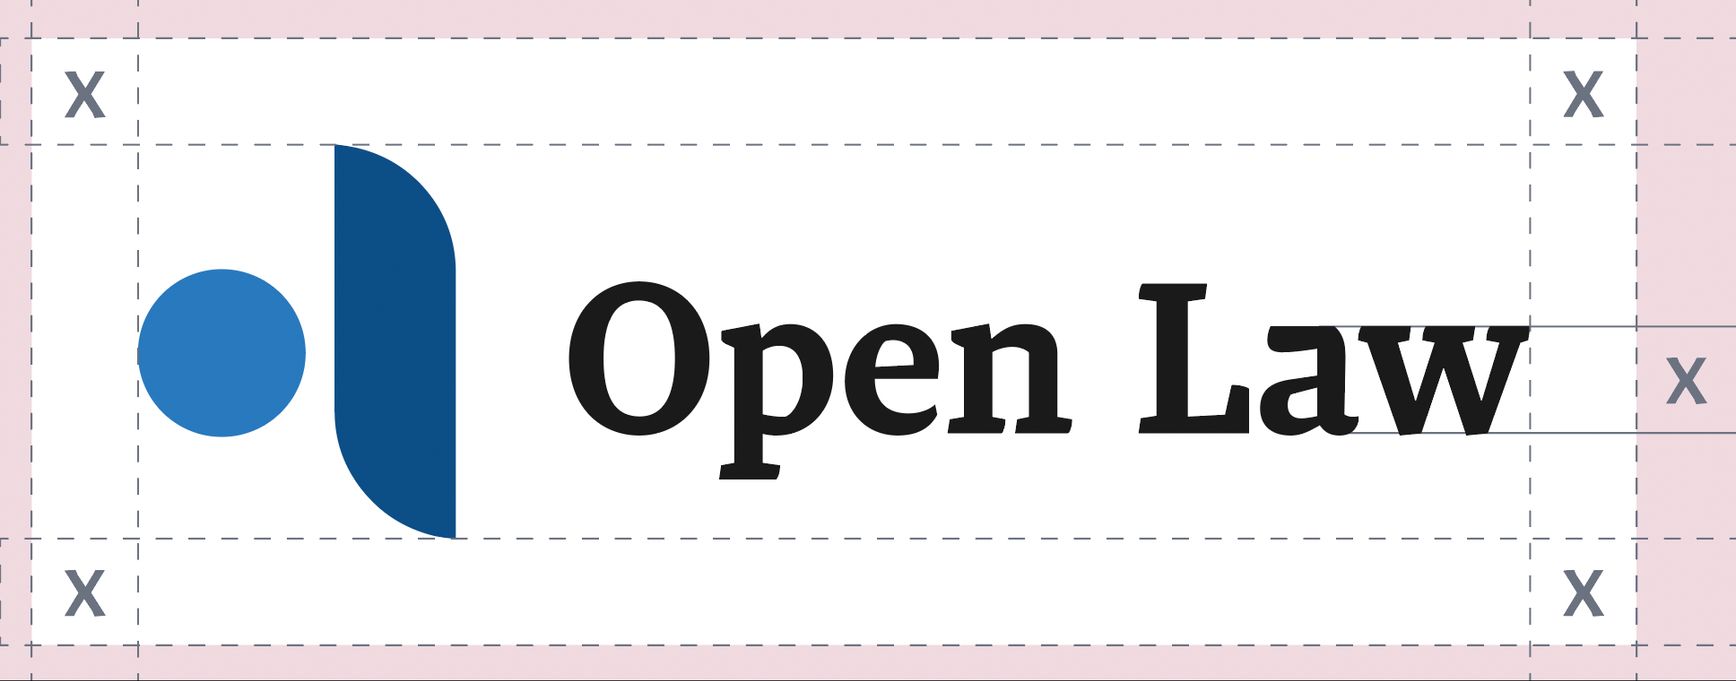 Open Law logo redesign